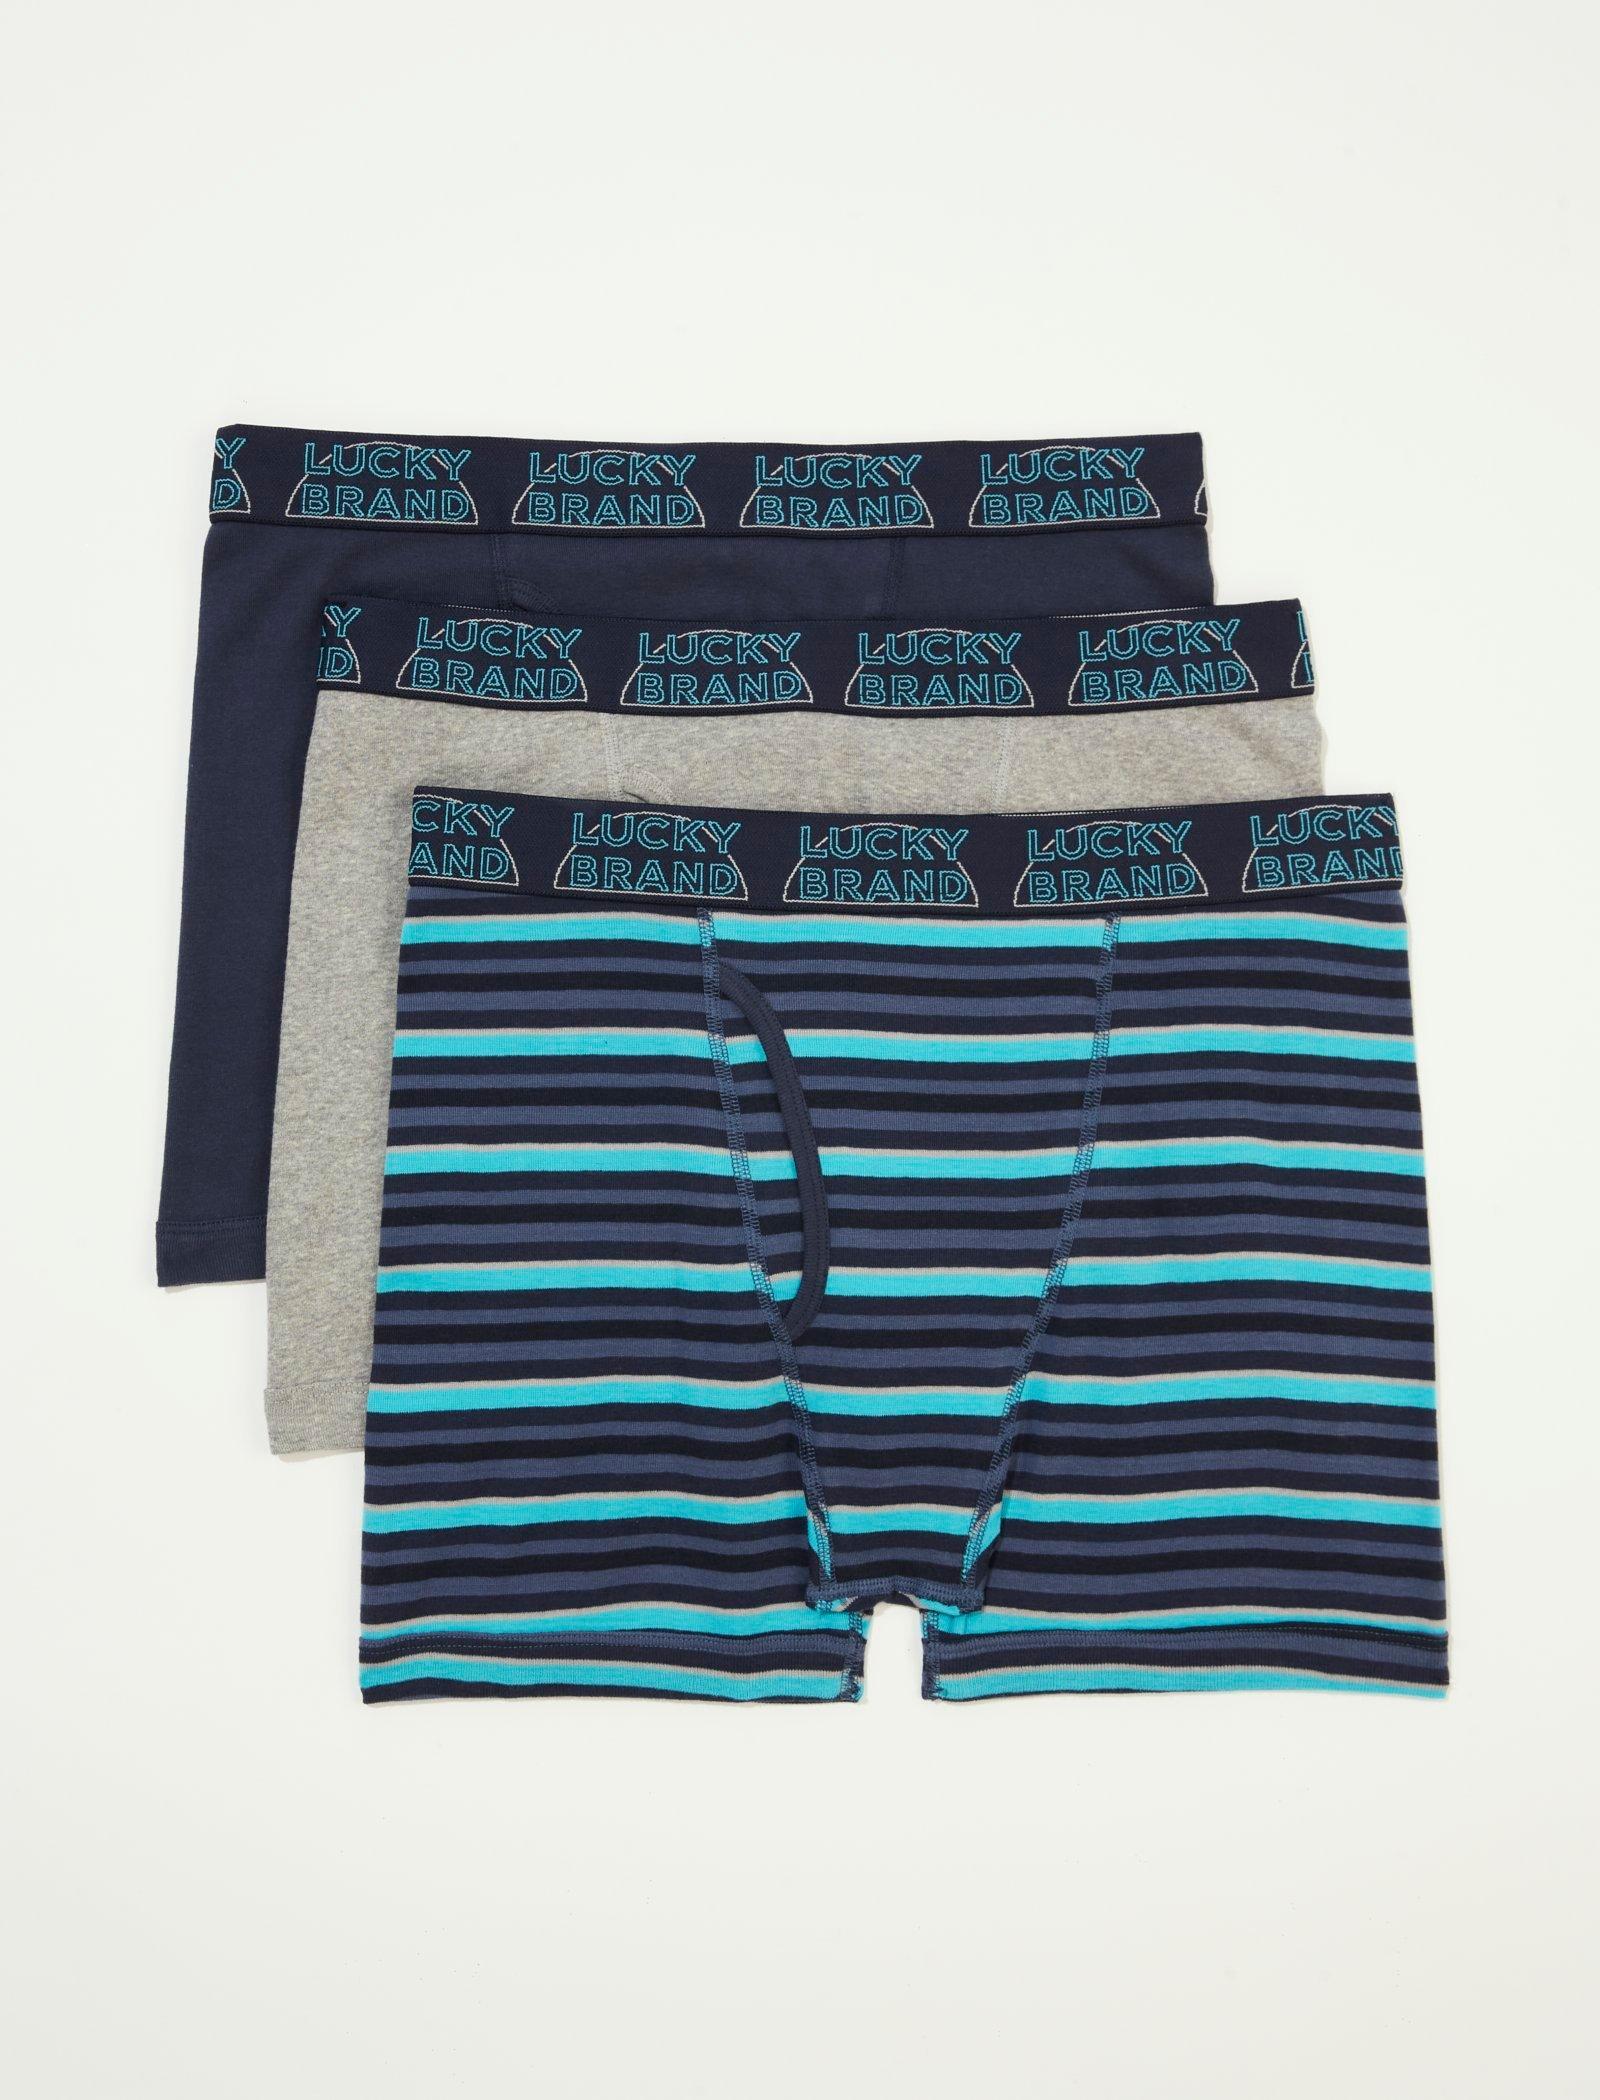 Lucky Brand Boxer X3 - 221 Hollywood Fish - Small Men Brief Underwear Pack P259, Men's